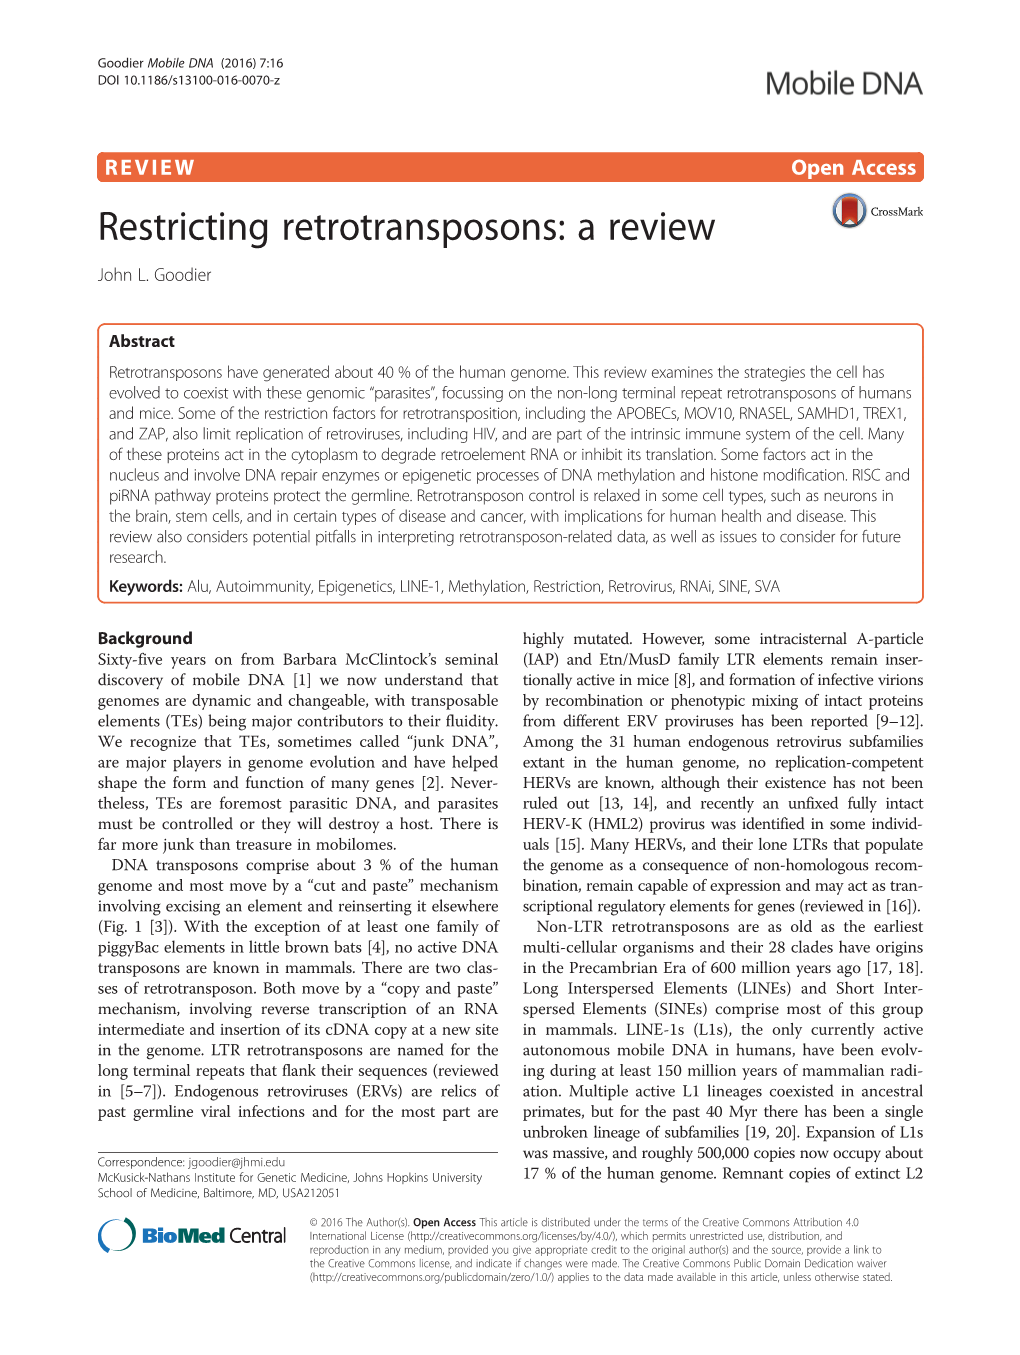 VIEW Open Access Restricting Retrotransposons: a Review John L